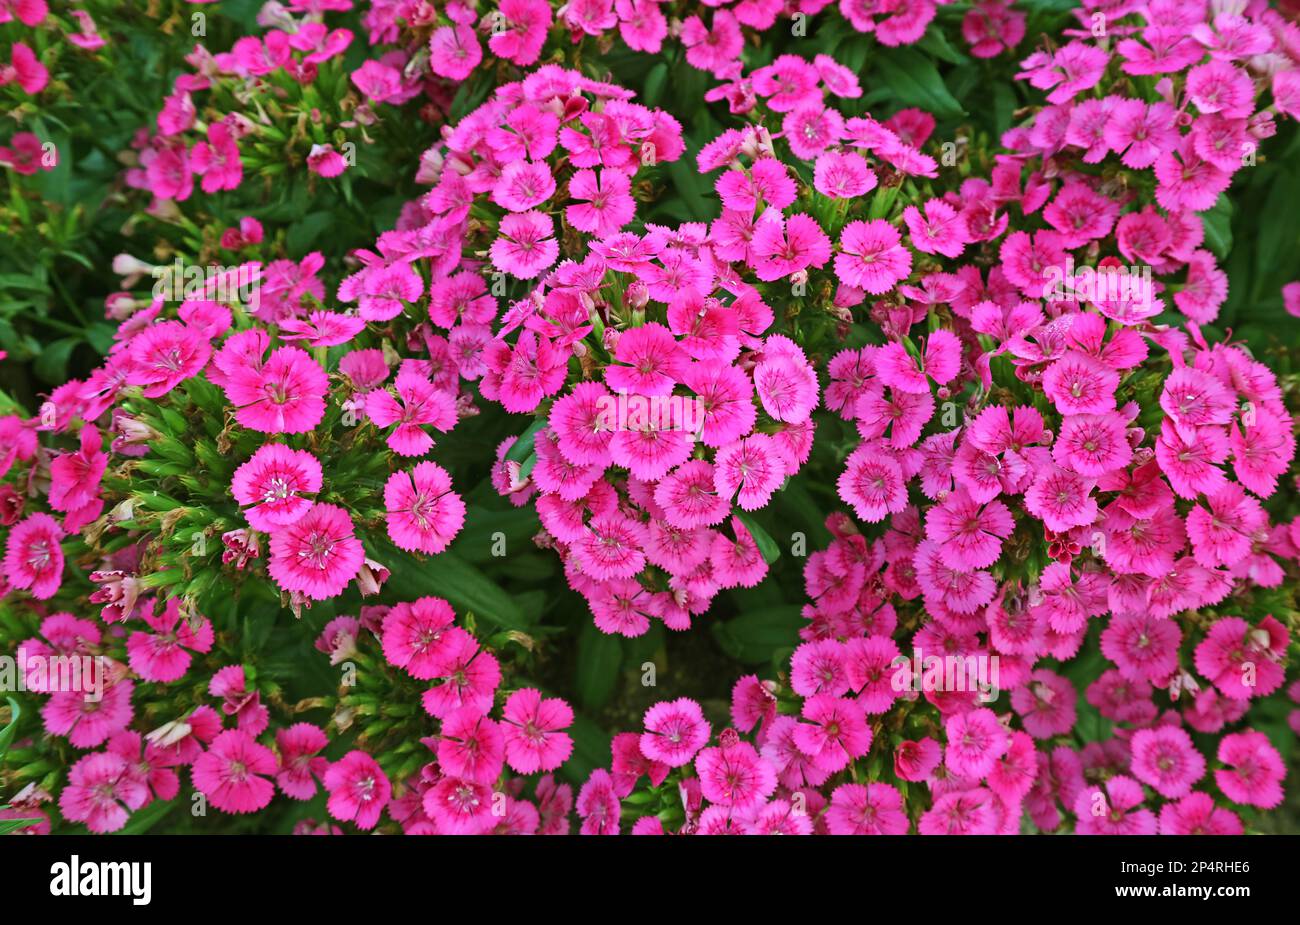 Bunches of Eye Catching Blossoming Dianthus Seguieri or Sequier's Pink Flowers Stock Photo